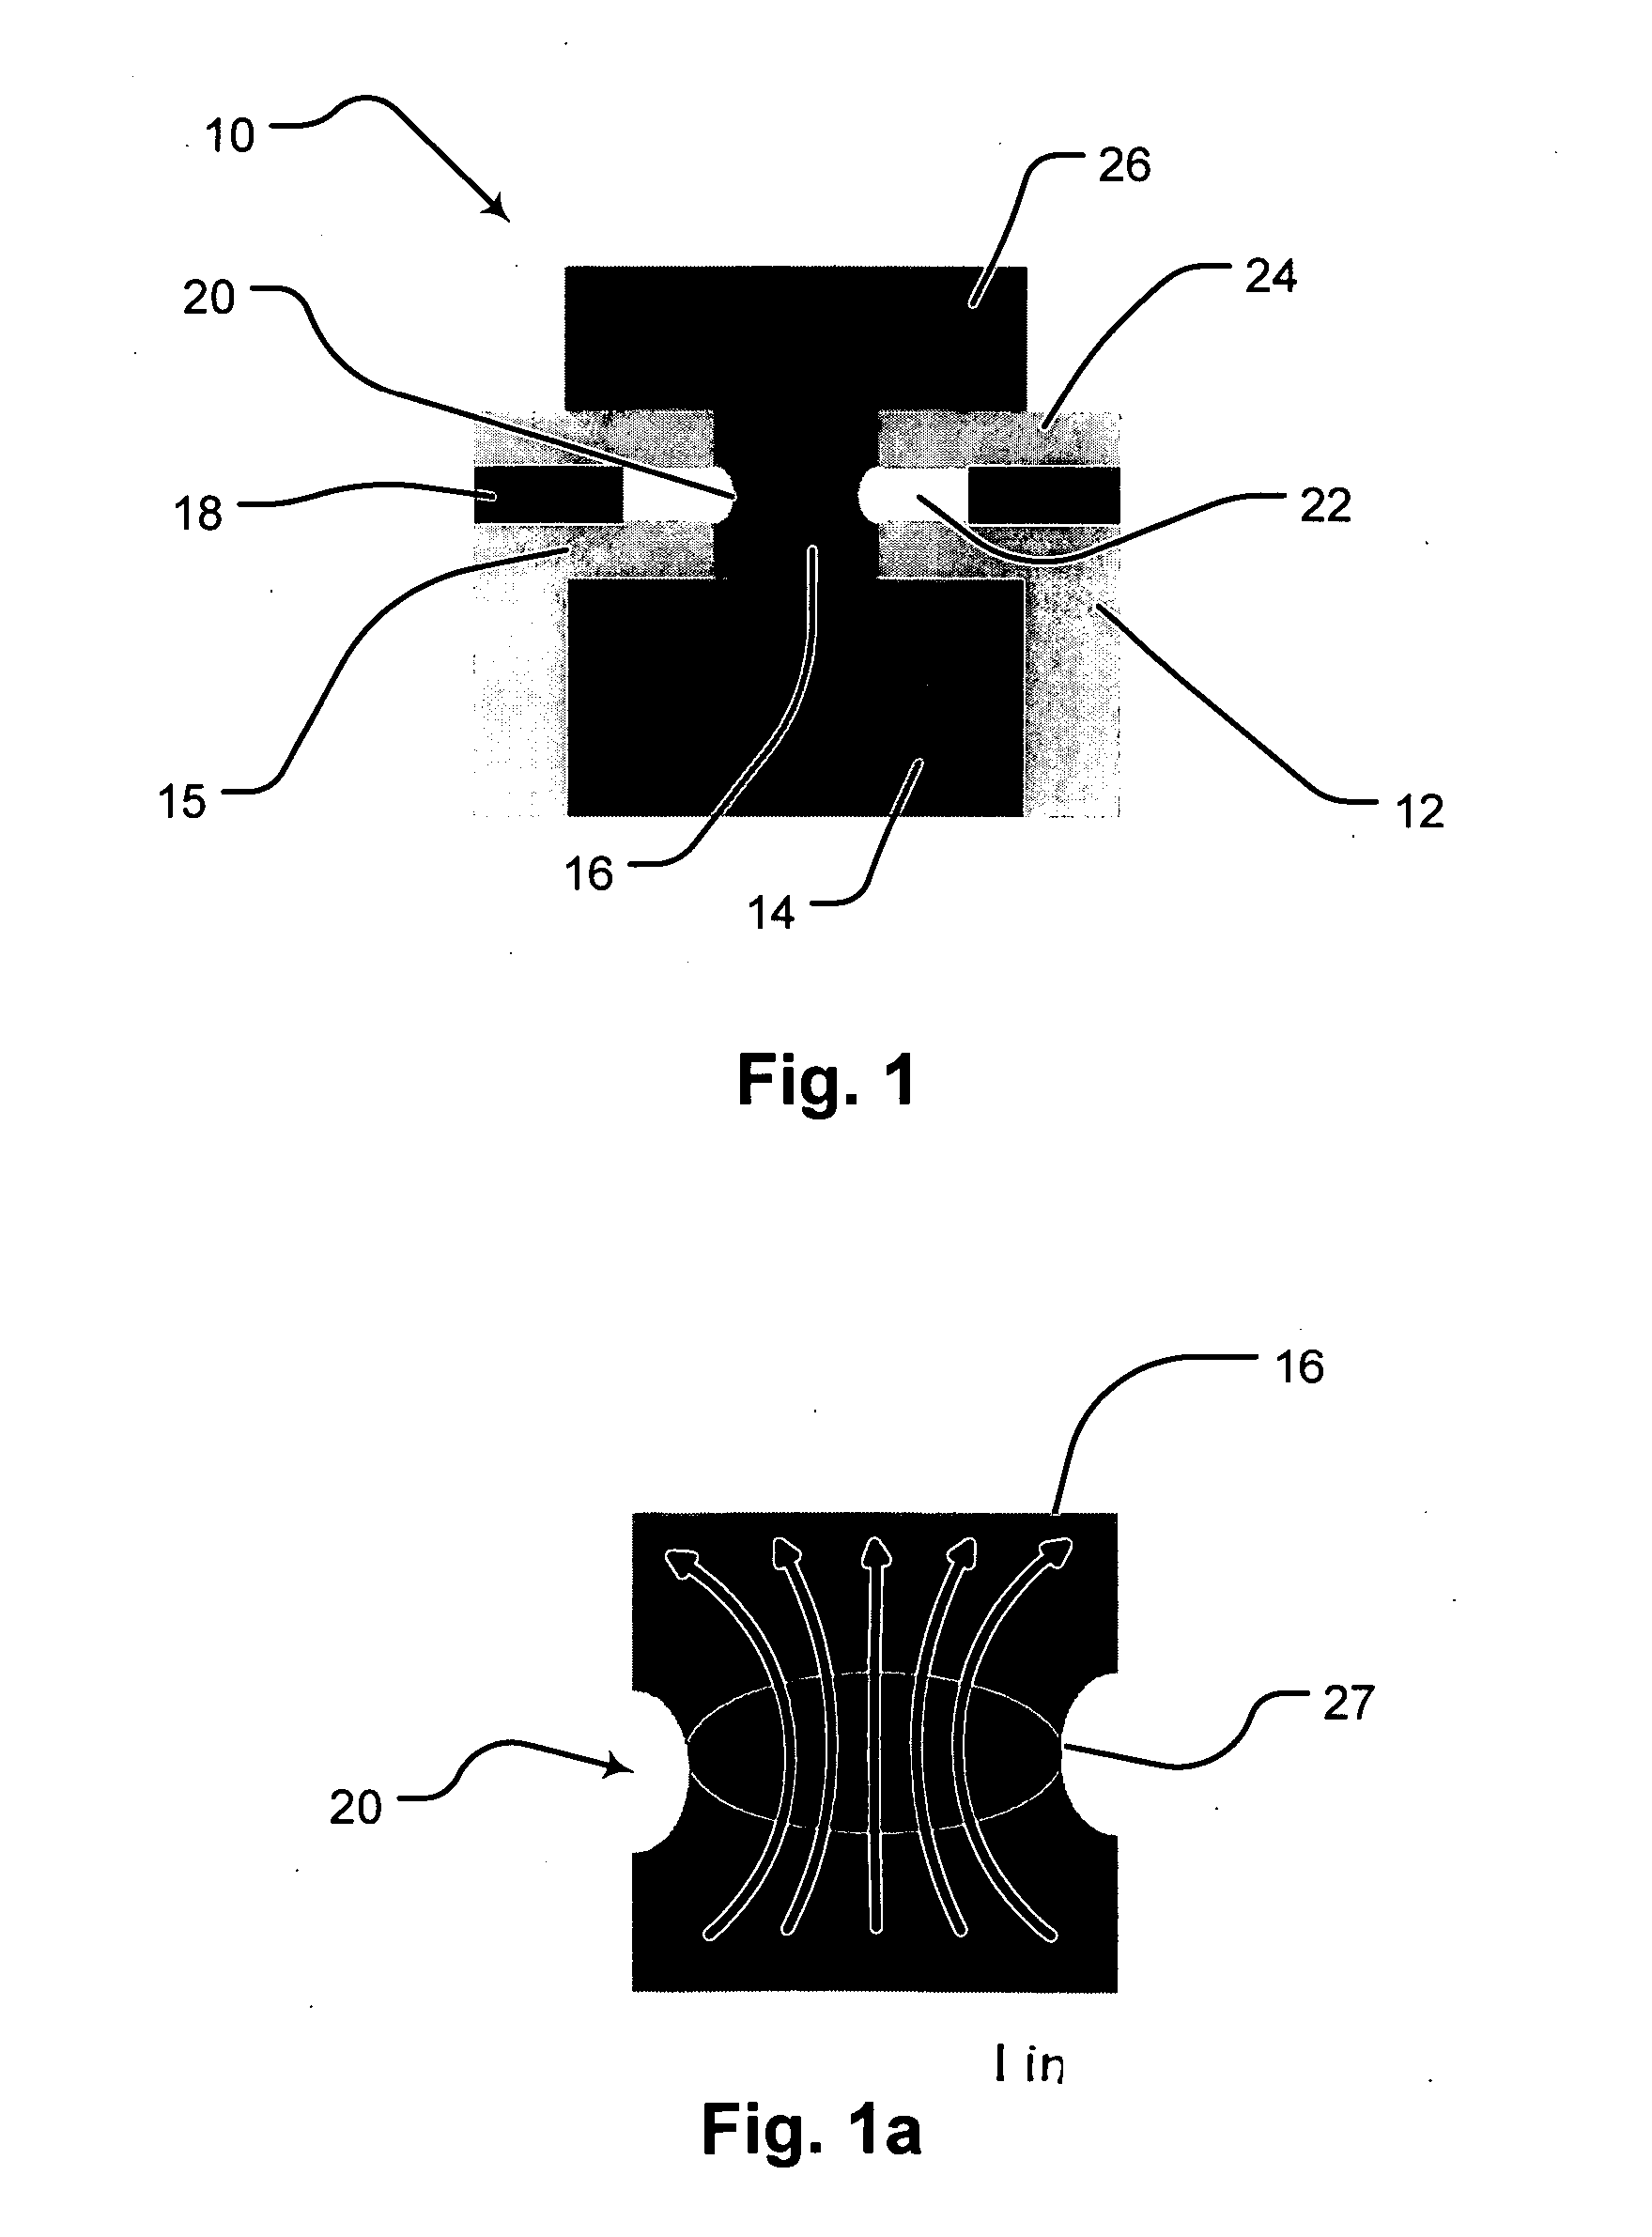 Vacuum cell thermal isolation for a phase change memory device